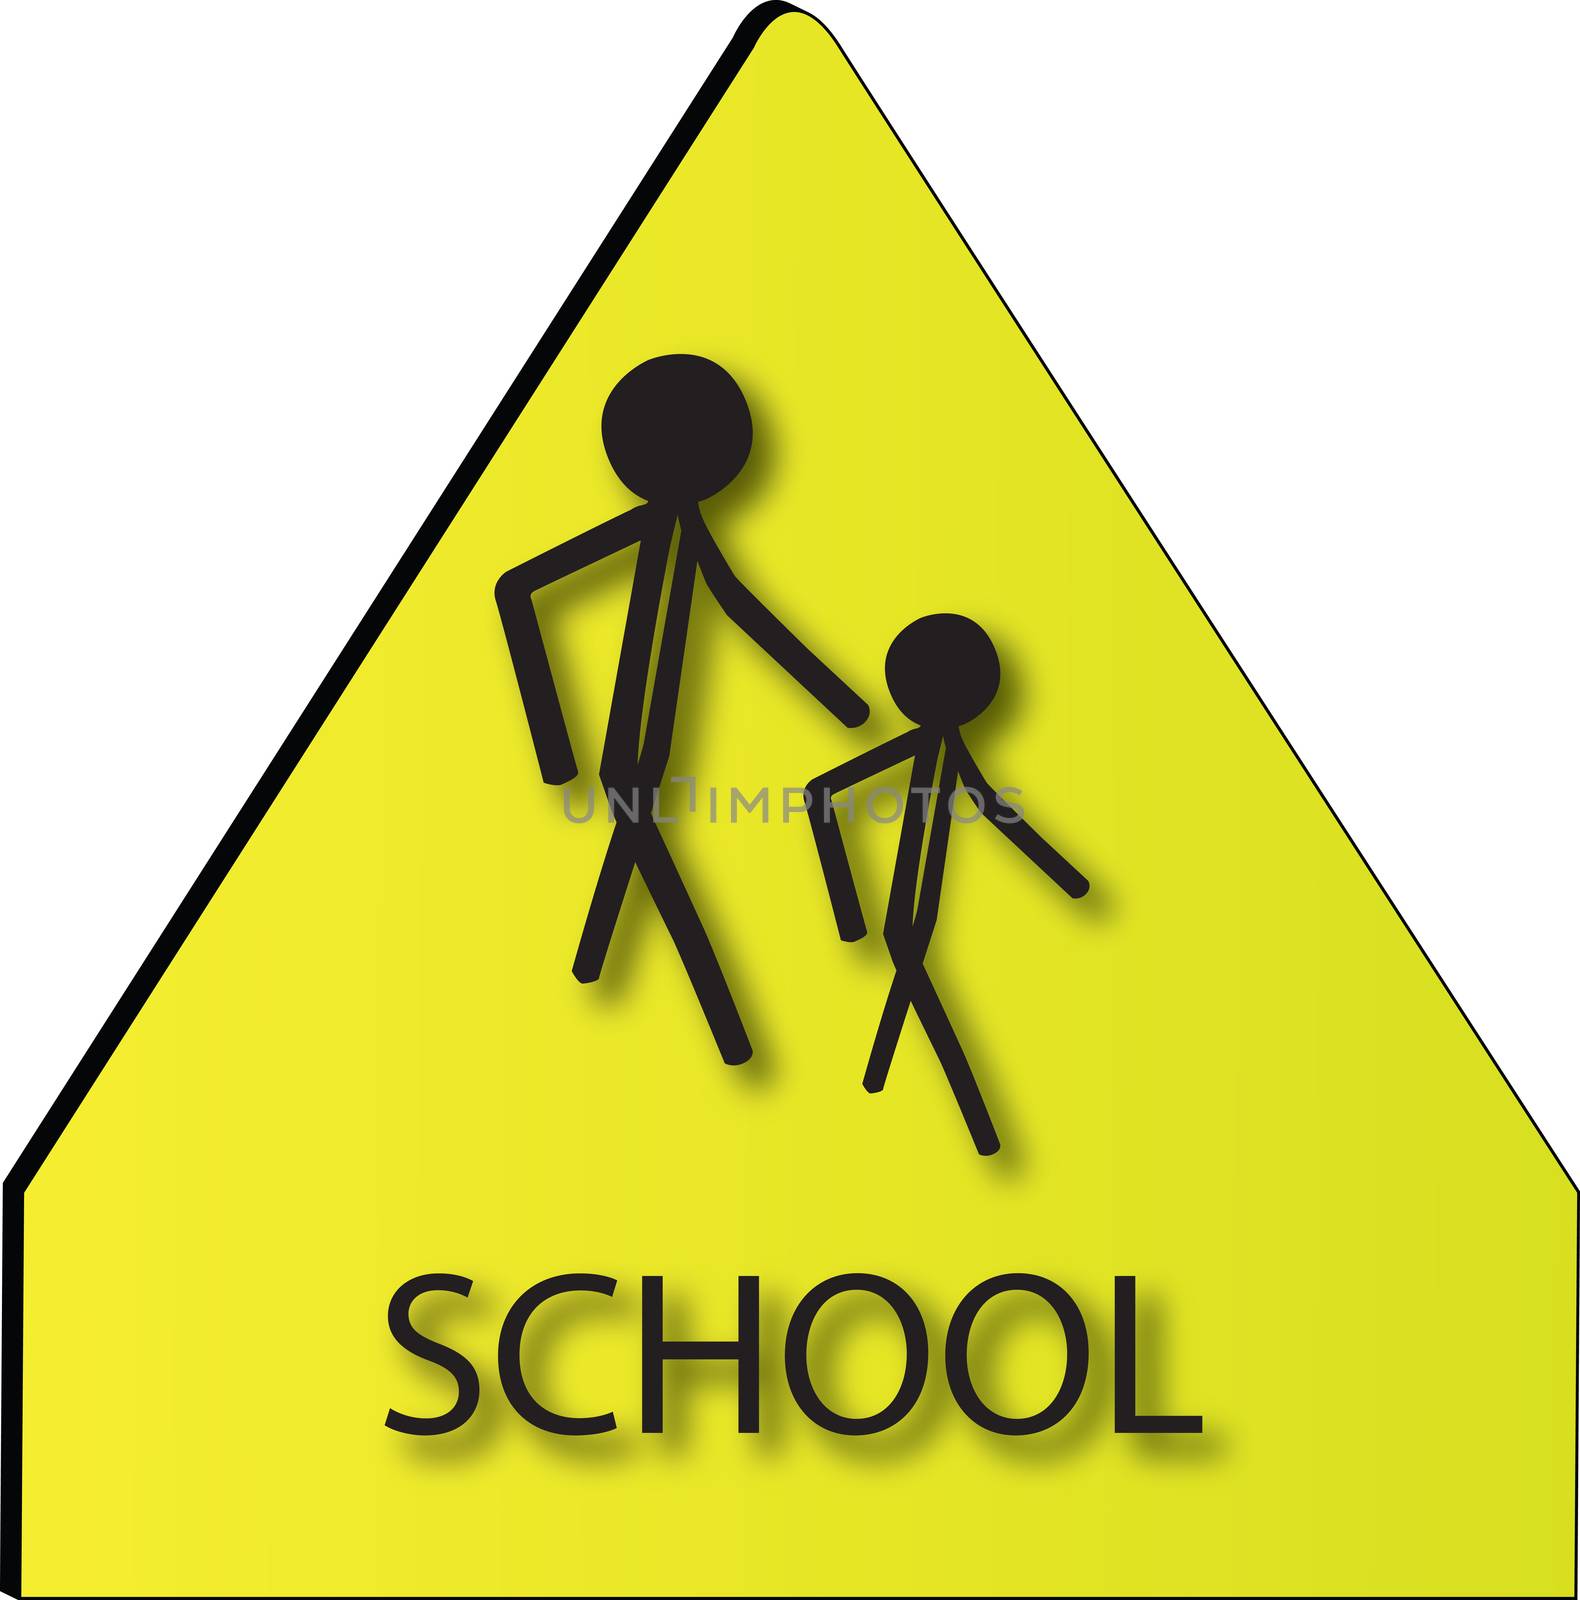 sign for school children in black and yellow